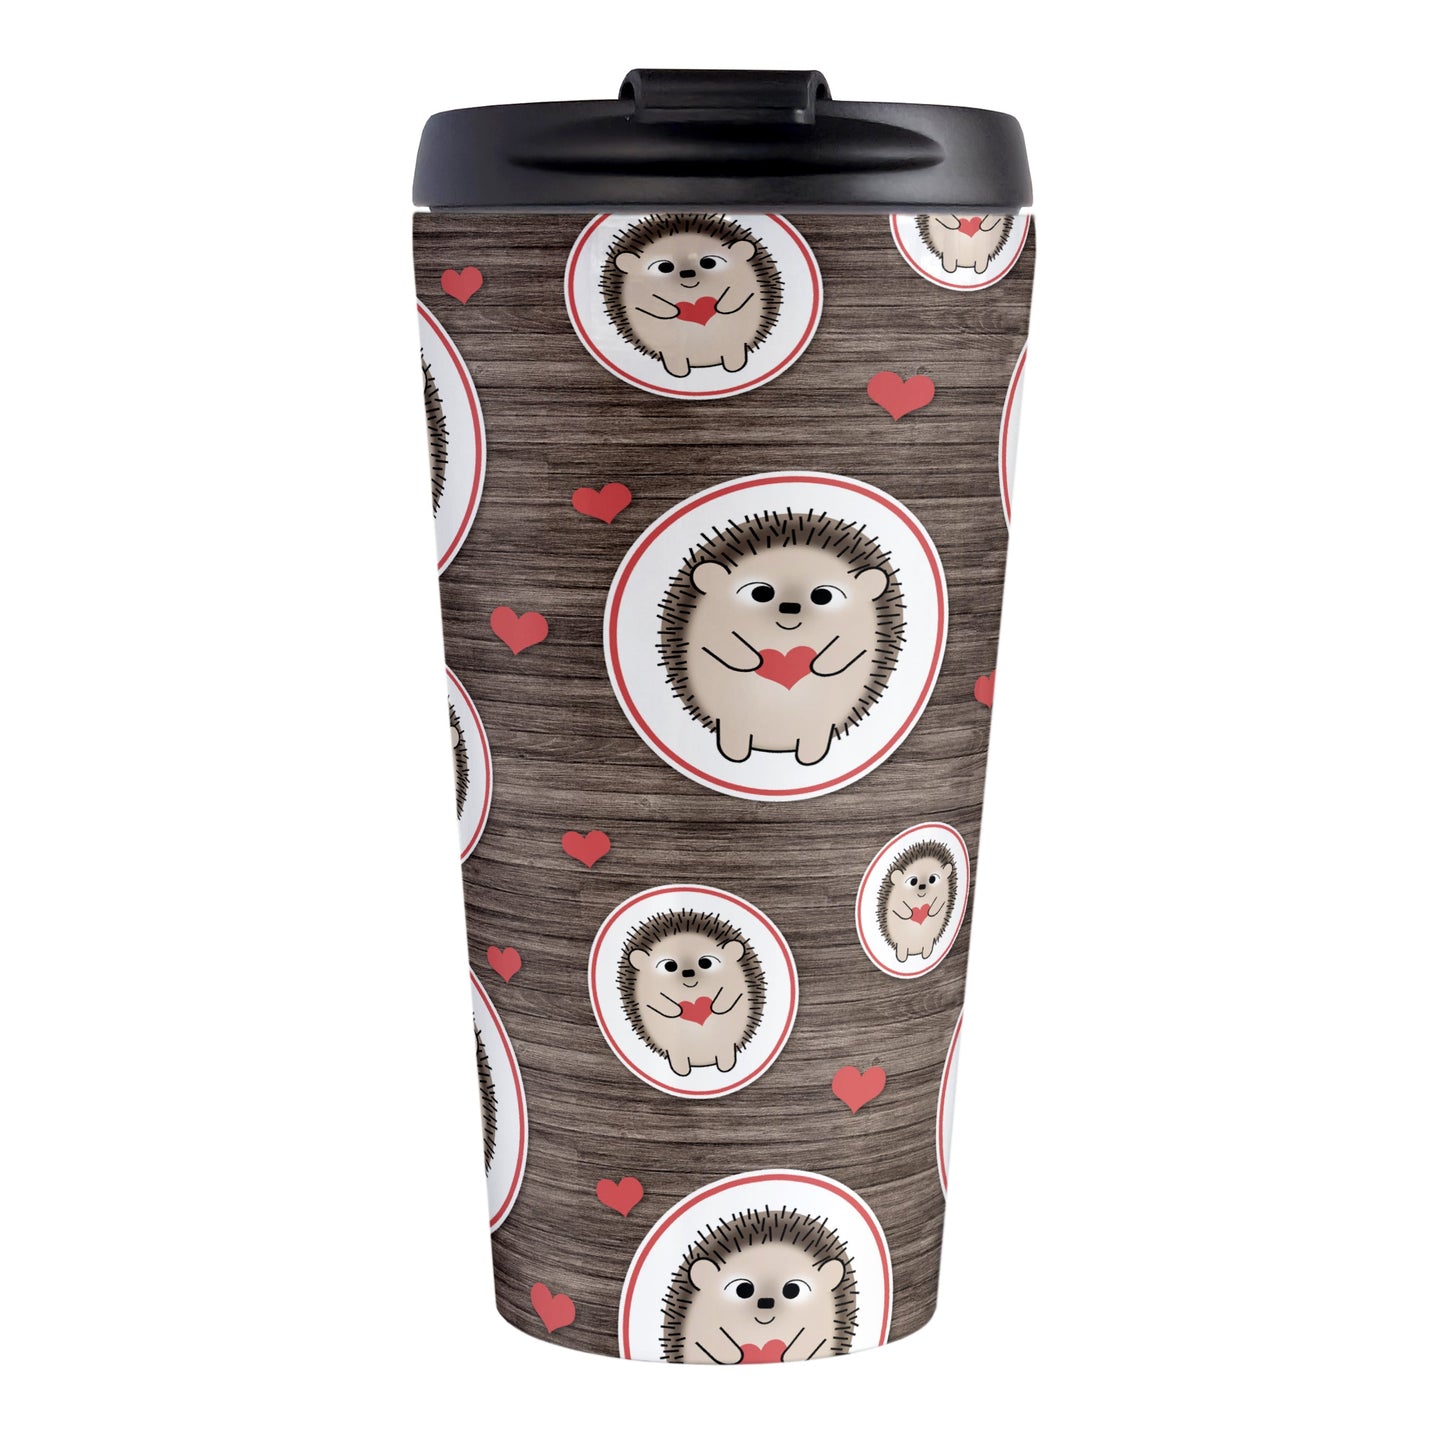 Rustic Wood Red Heart Hedgehog Travel Mug (15oz, stainless steel insulated) at Amy's Coffee Mugs